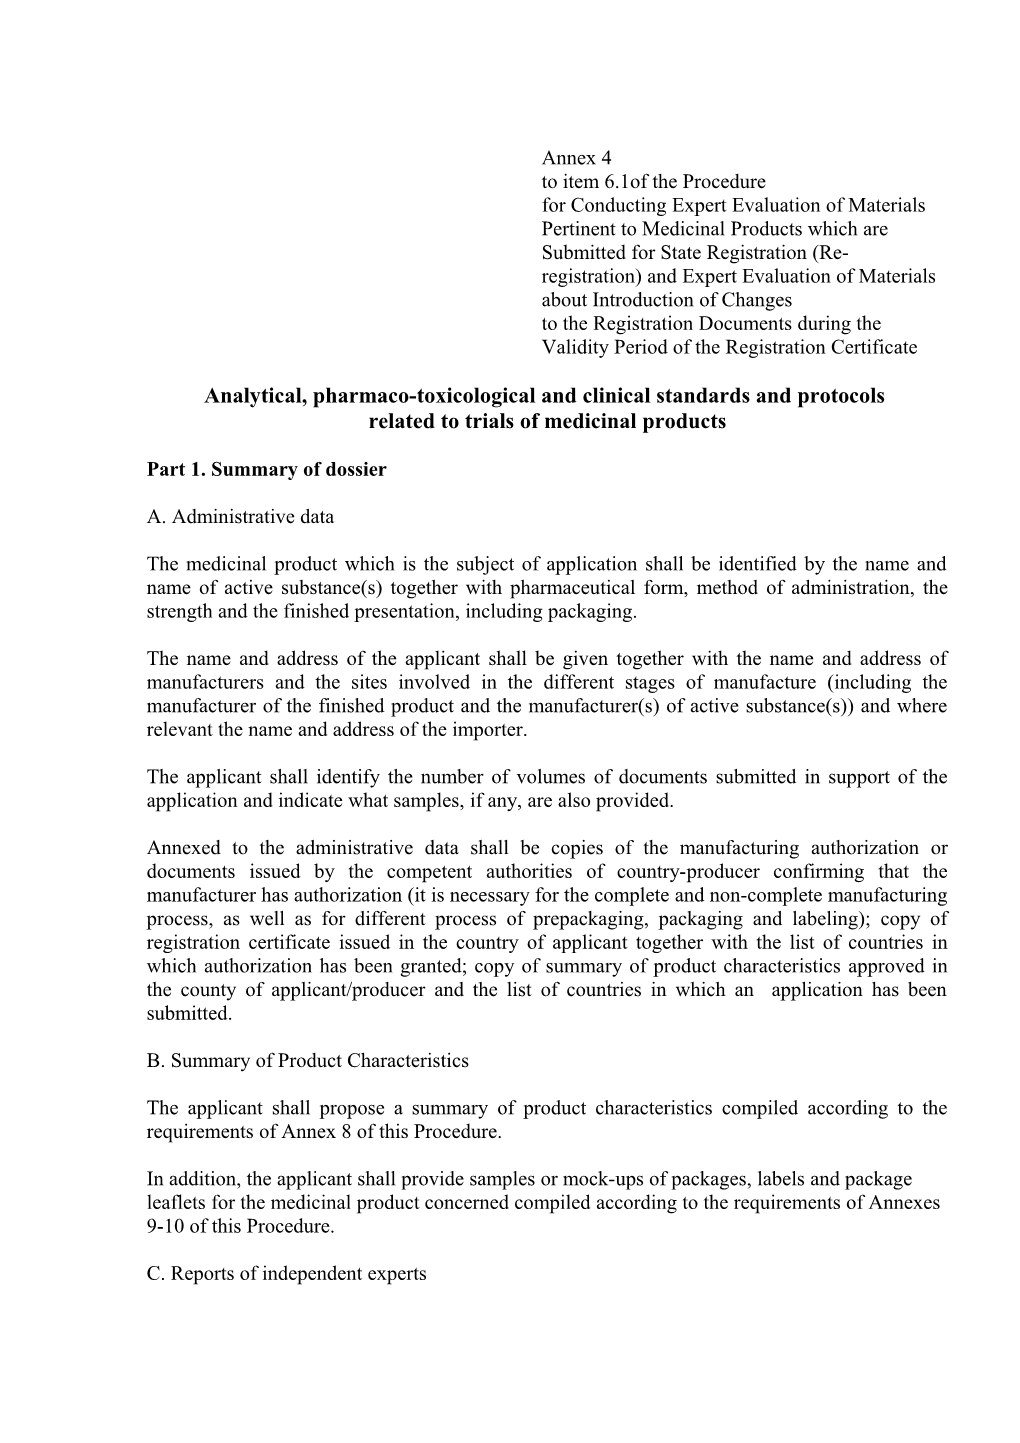 Analytical, Pharmaco-Toxicological and Clinical Standards and Protocols Related to Trials